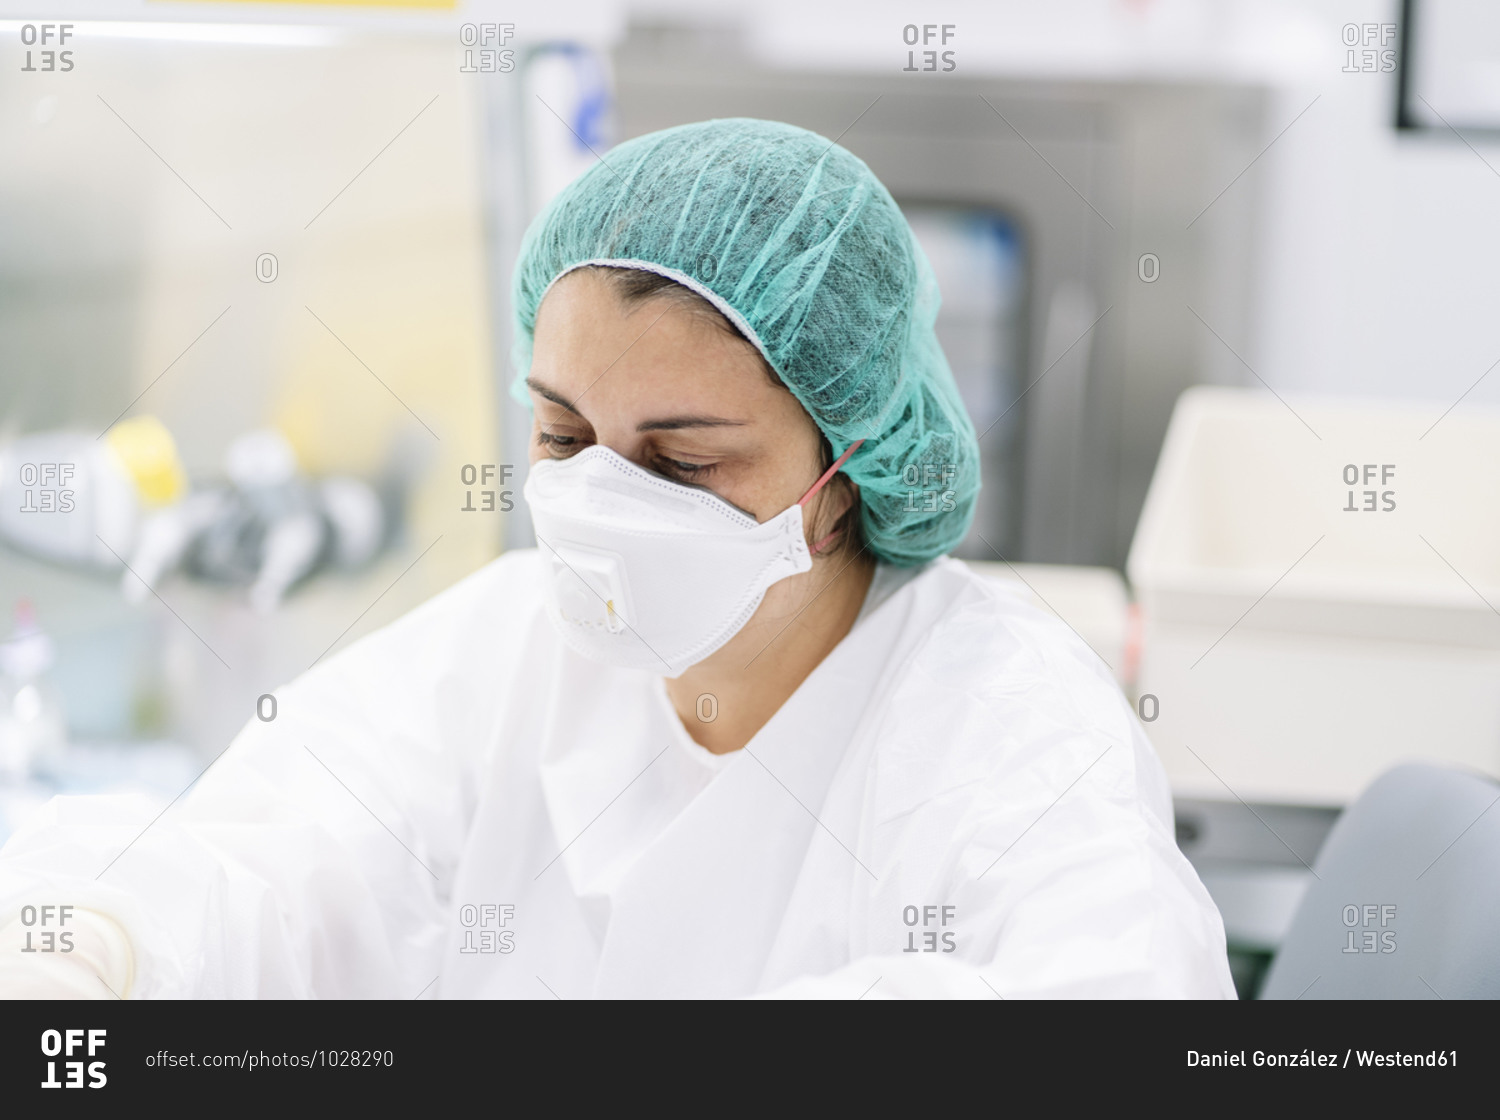 Close-up of female pharmacist wearing surgical mask and cap while working in laboratory